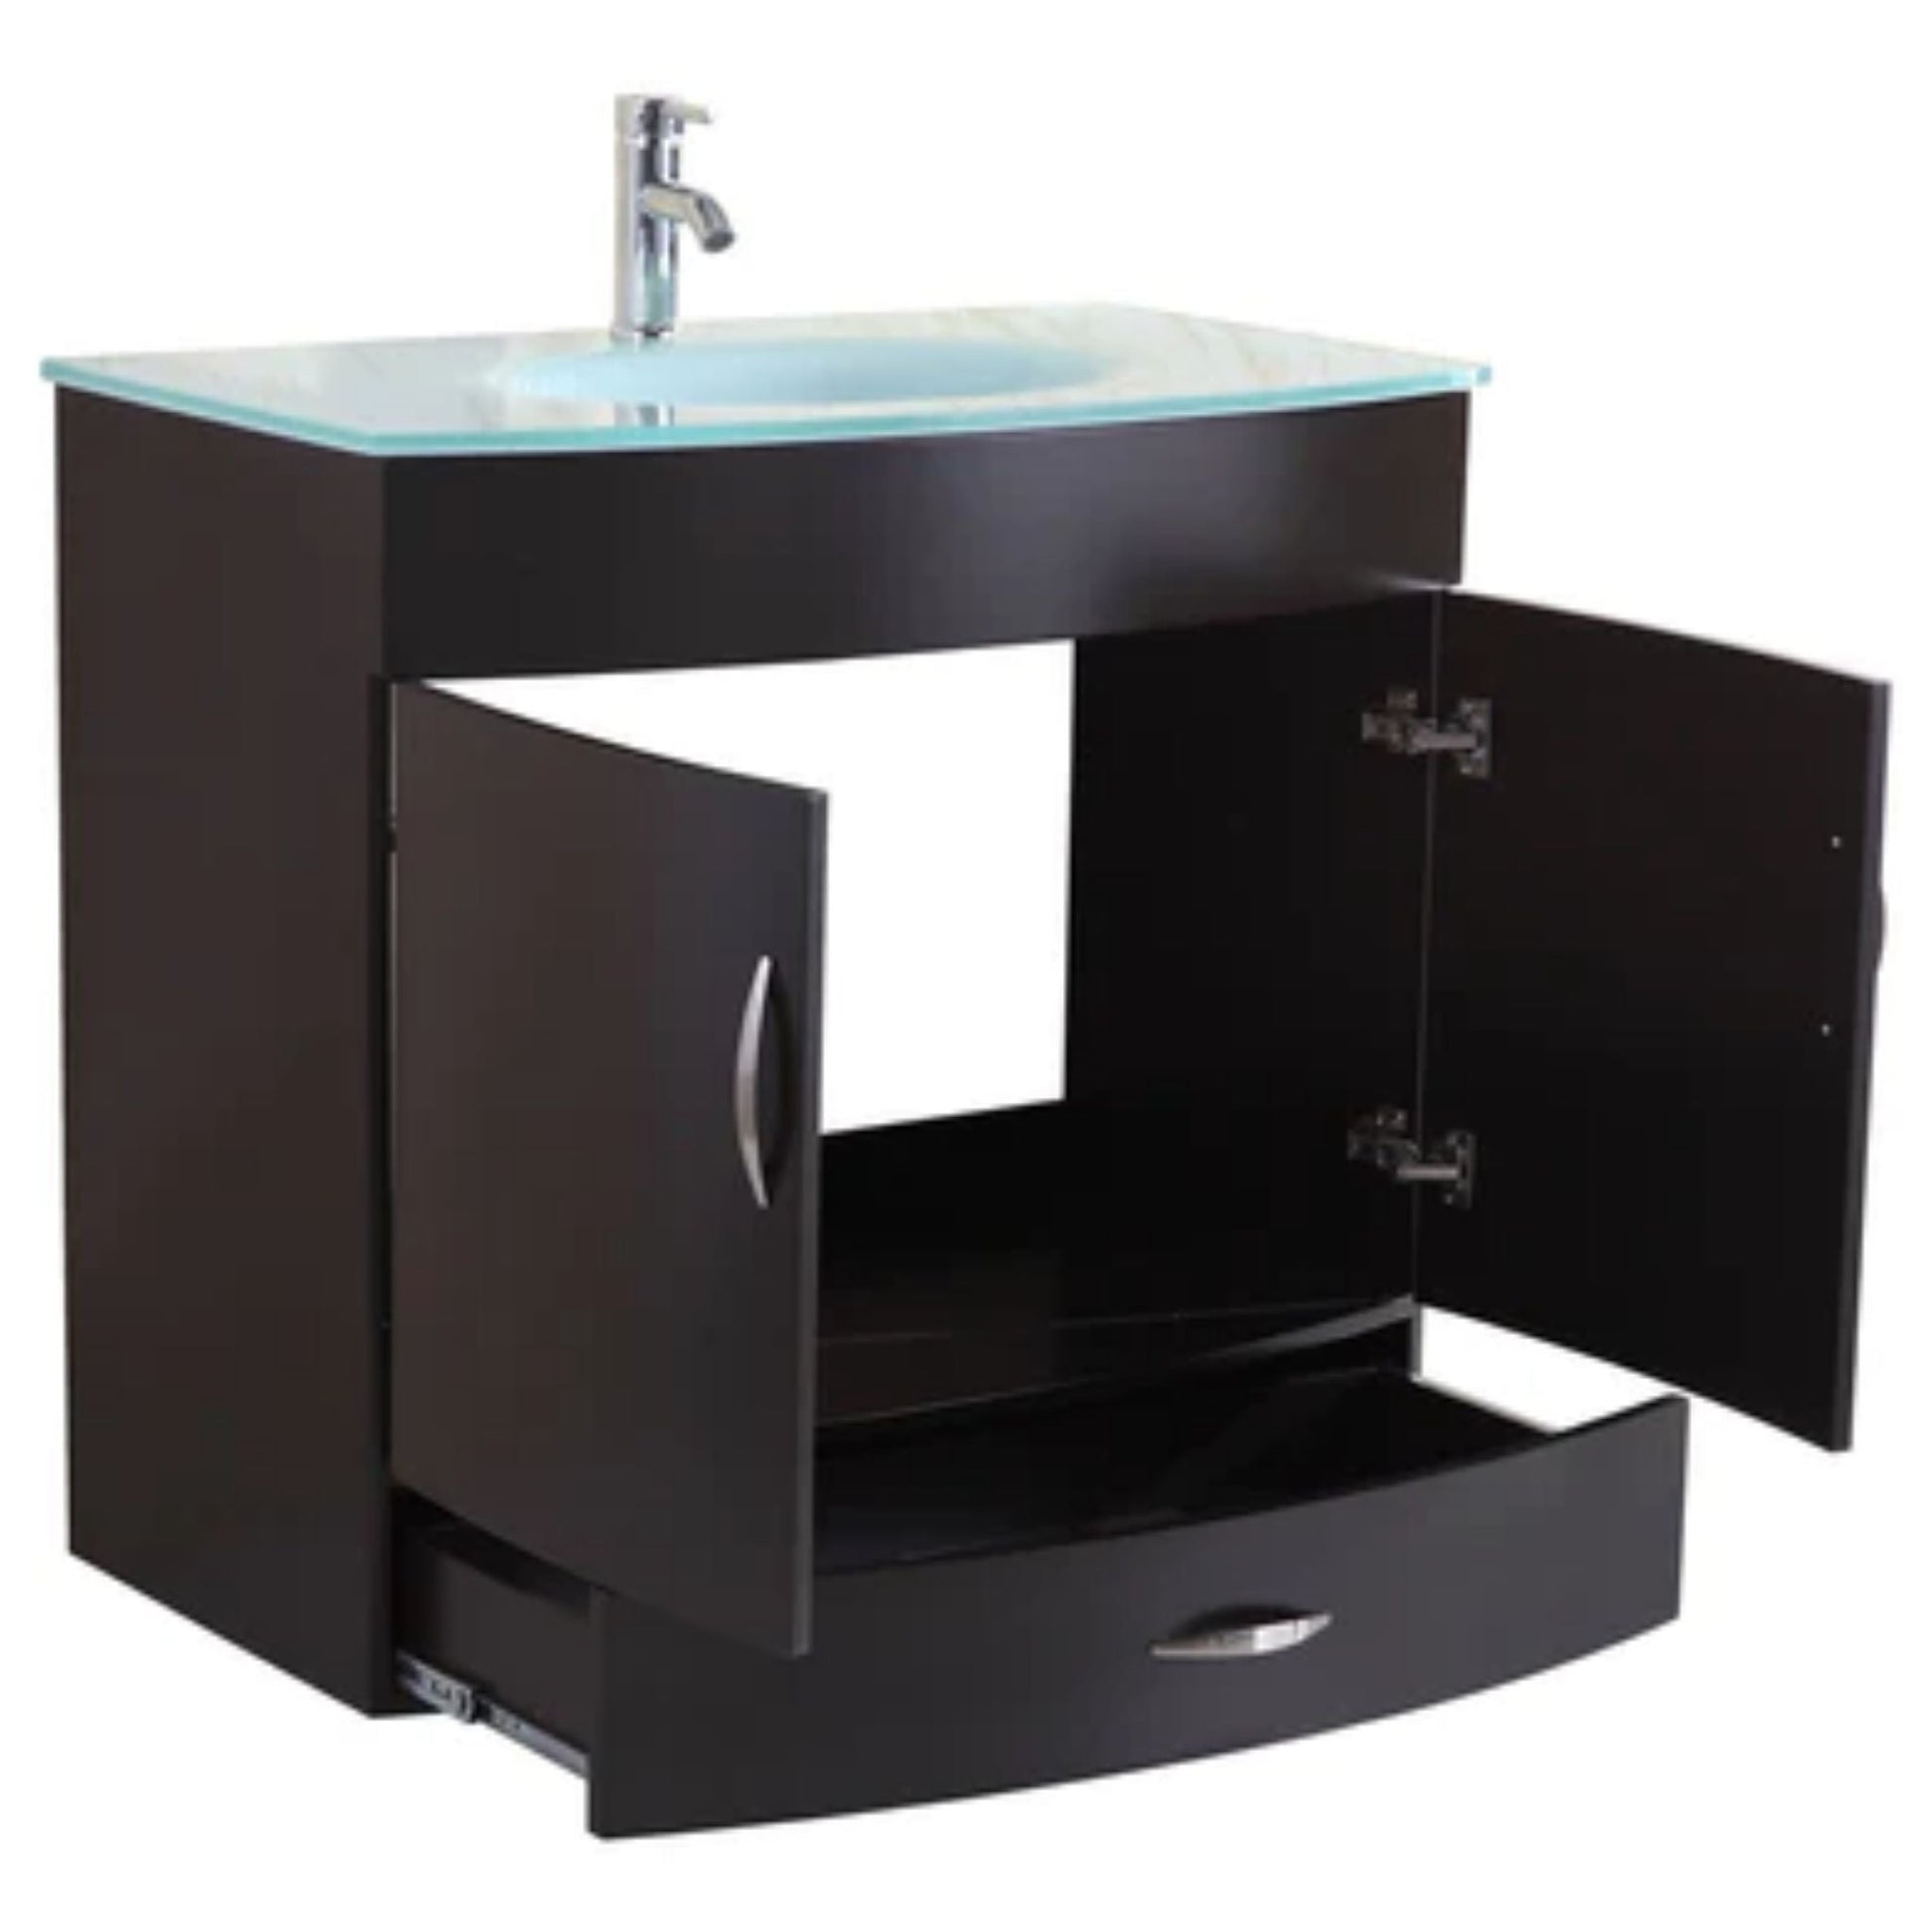 LessCare 36" Black Vanity Sink Base Cabinet with Mirror - Style 5